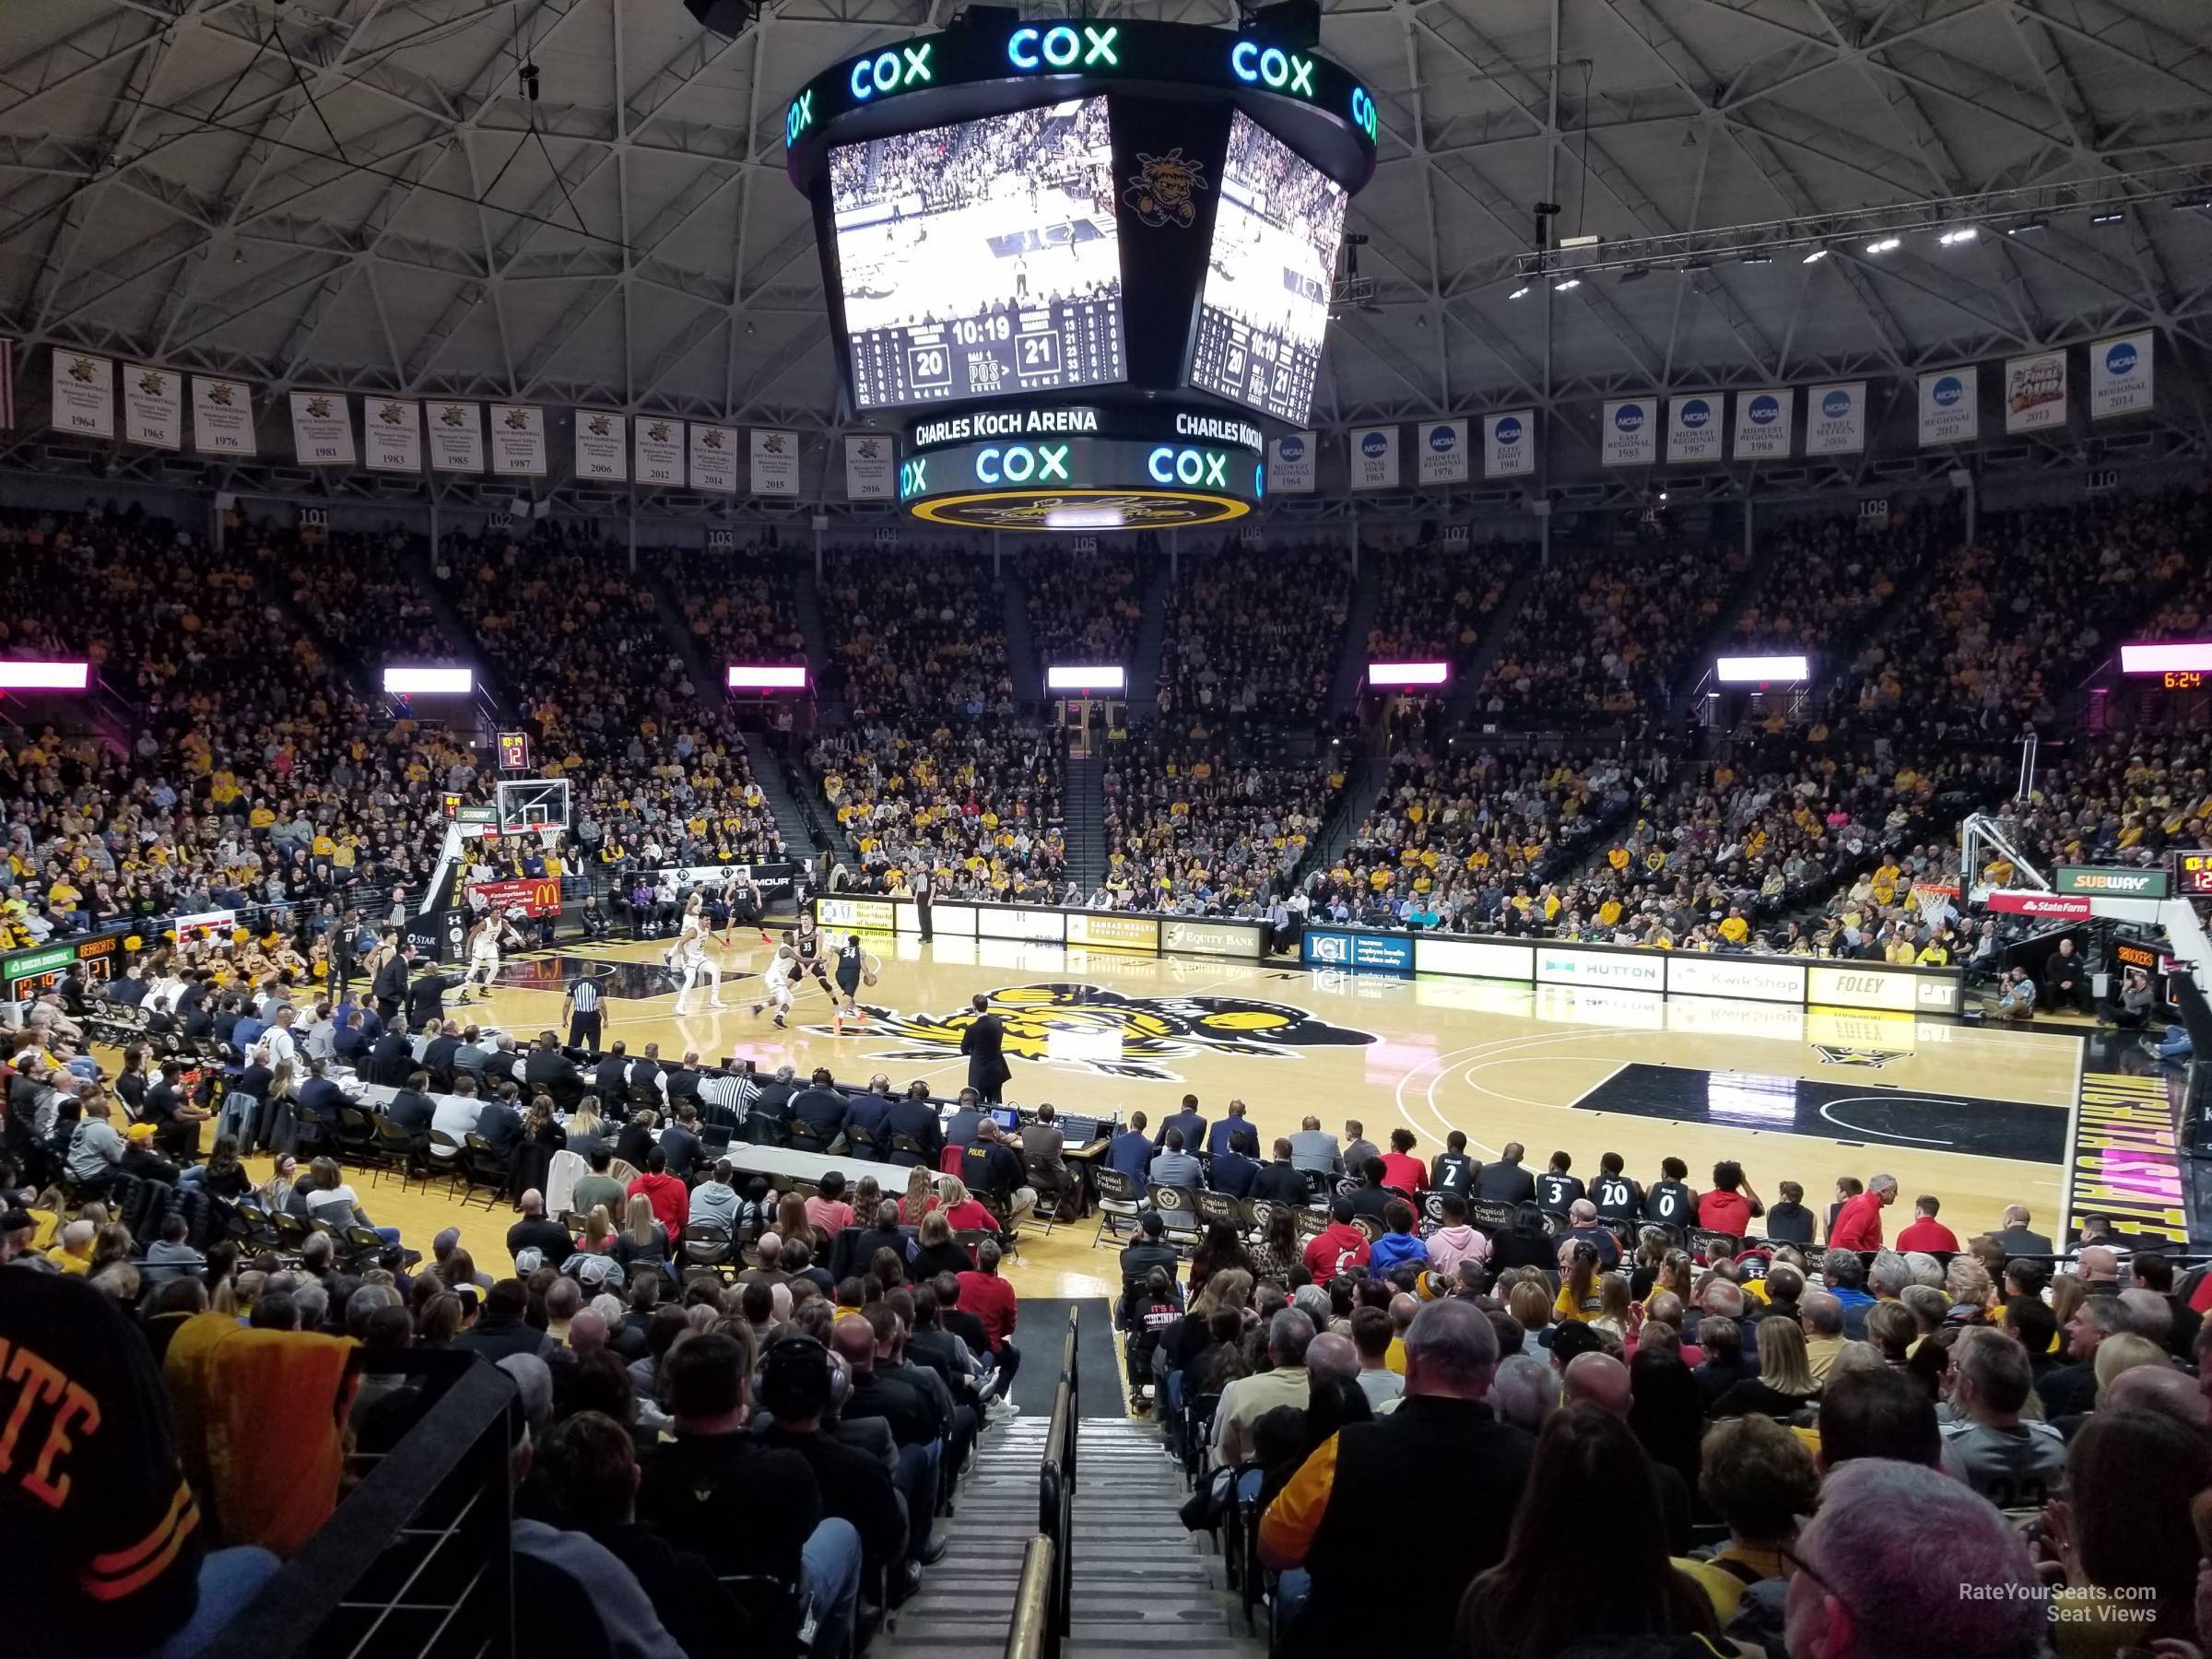 section 119, row 16 seat view  - charles koch arena